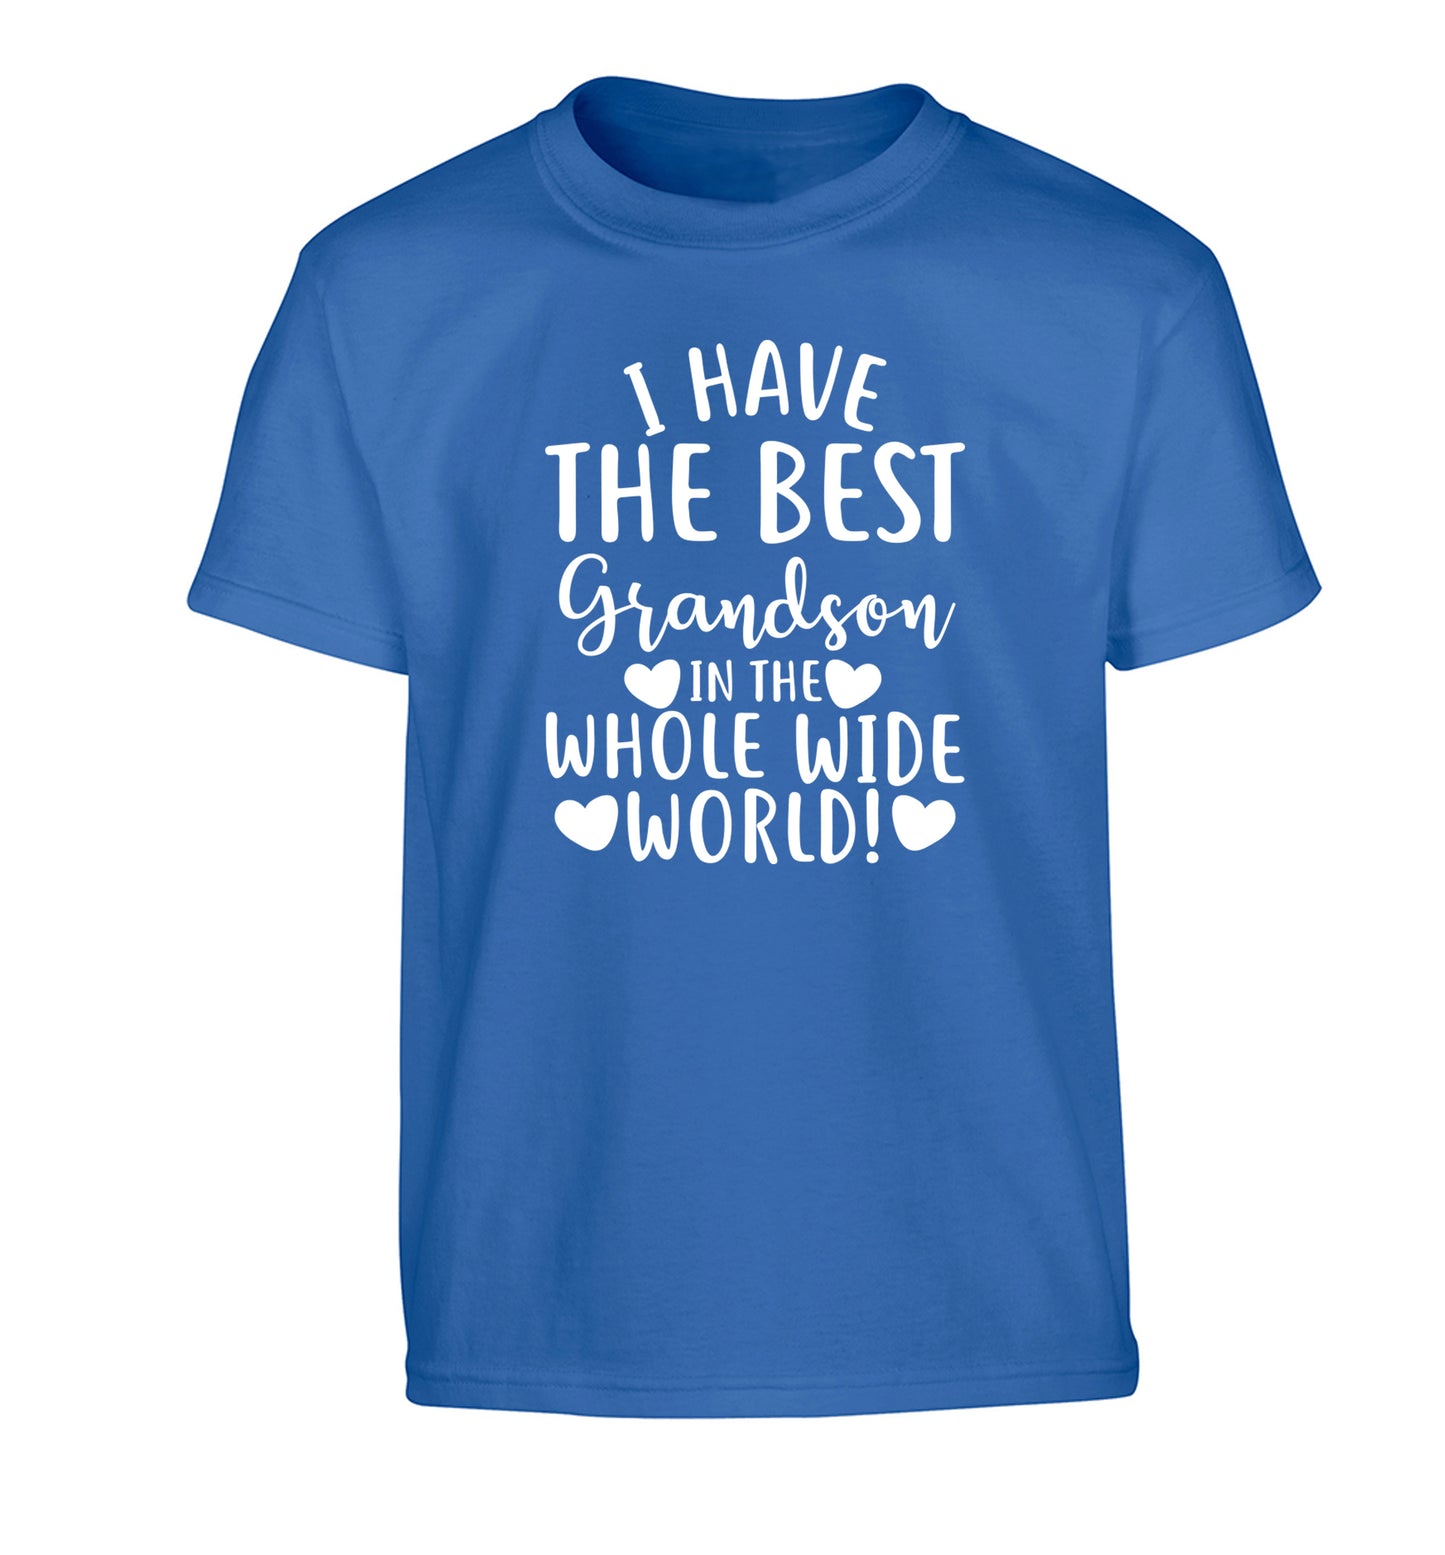 I have the best grandson in the whole wide world! Children's blue Tshirt 12-13 Years